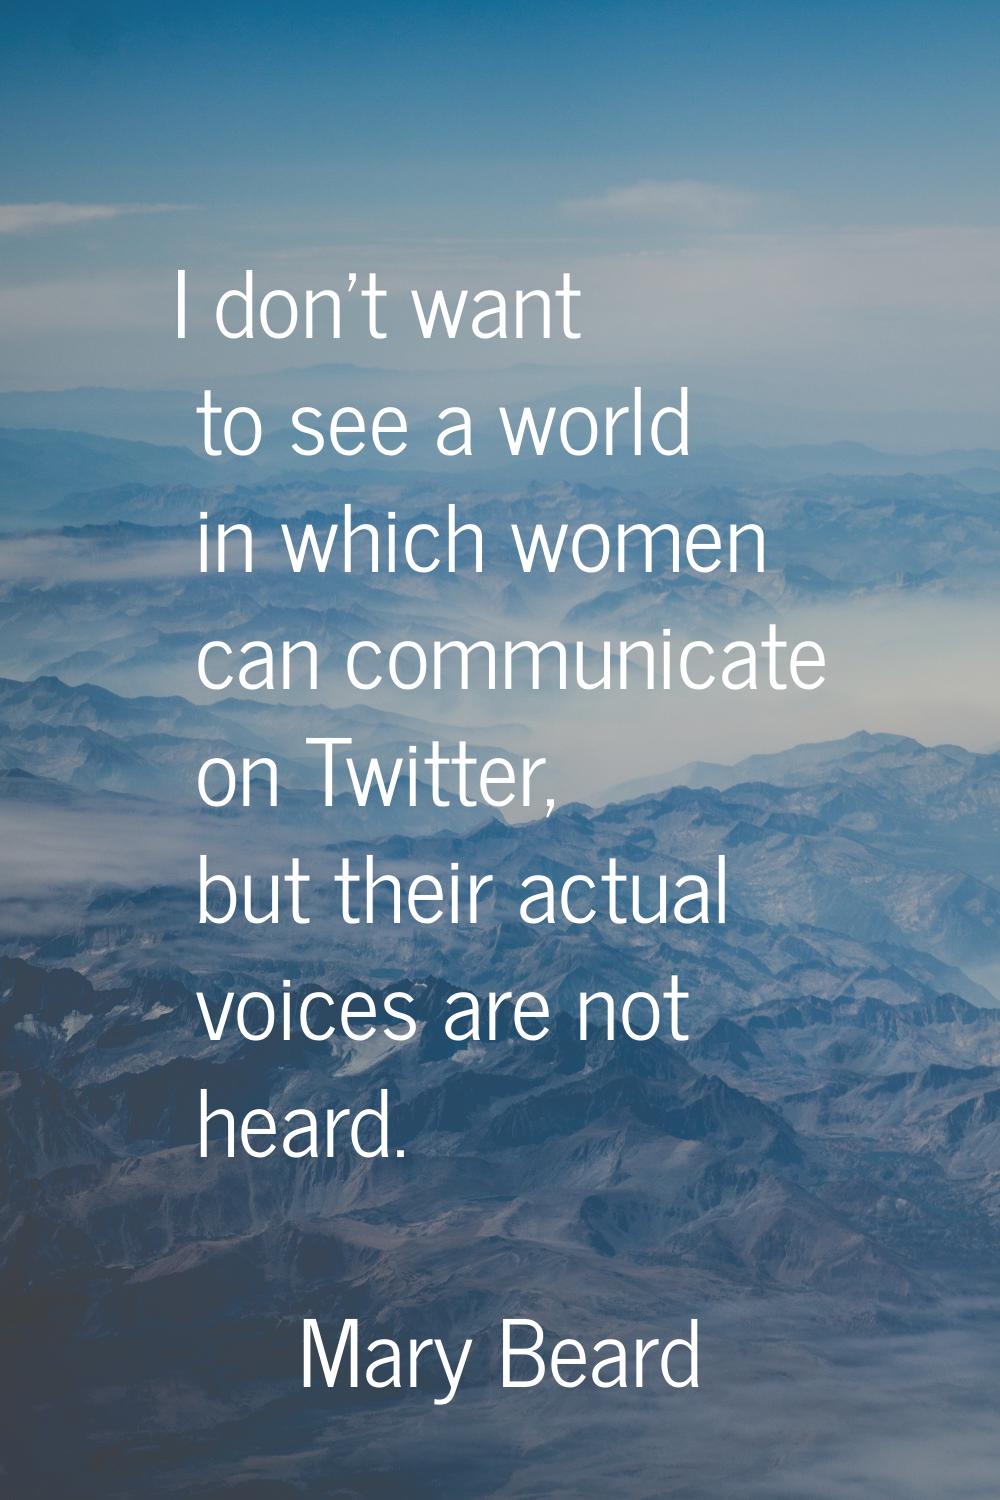 I don't want to see a world in which women can communicate on Twitter, but their actual voices are 